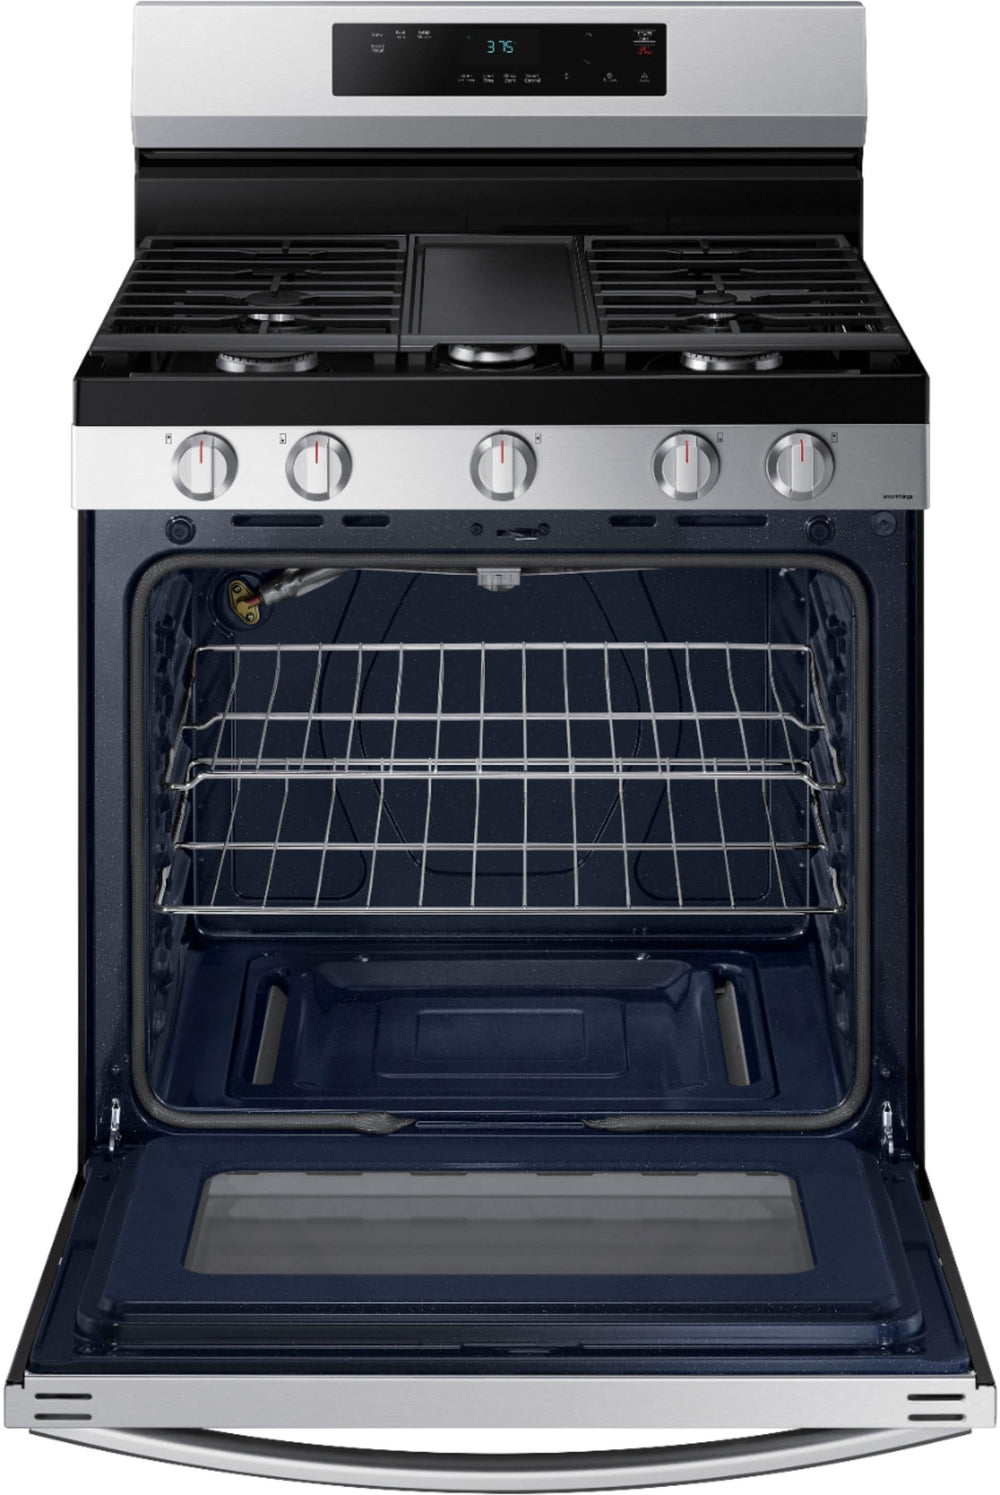 Samsung - 6.0 cu. ft. Freestanding Gas Range with WiFi and Integrated Griddle - Stainless steel_1